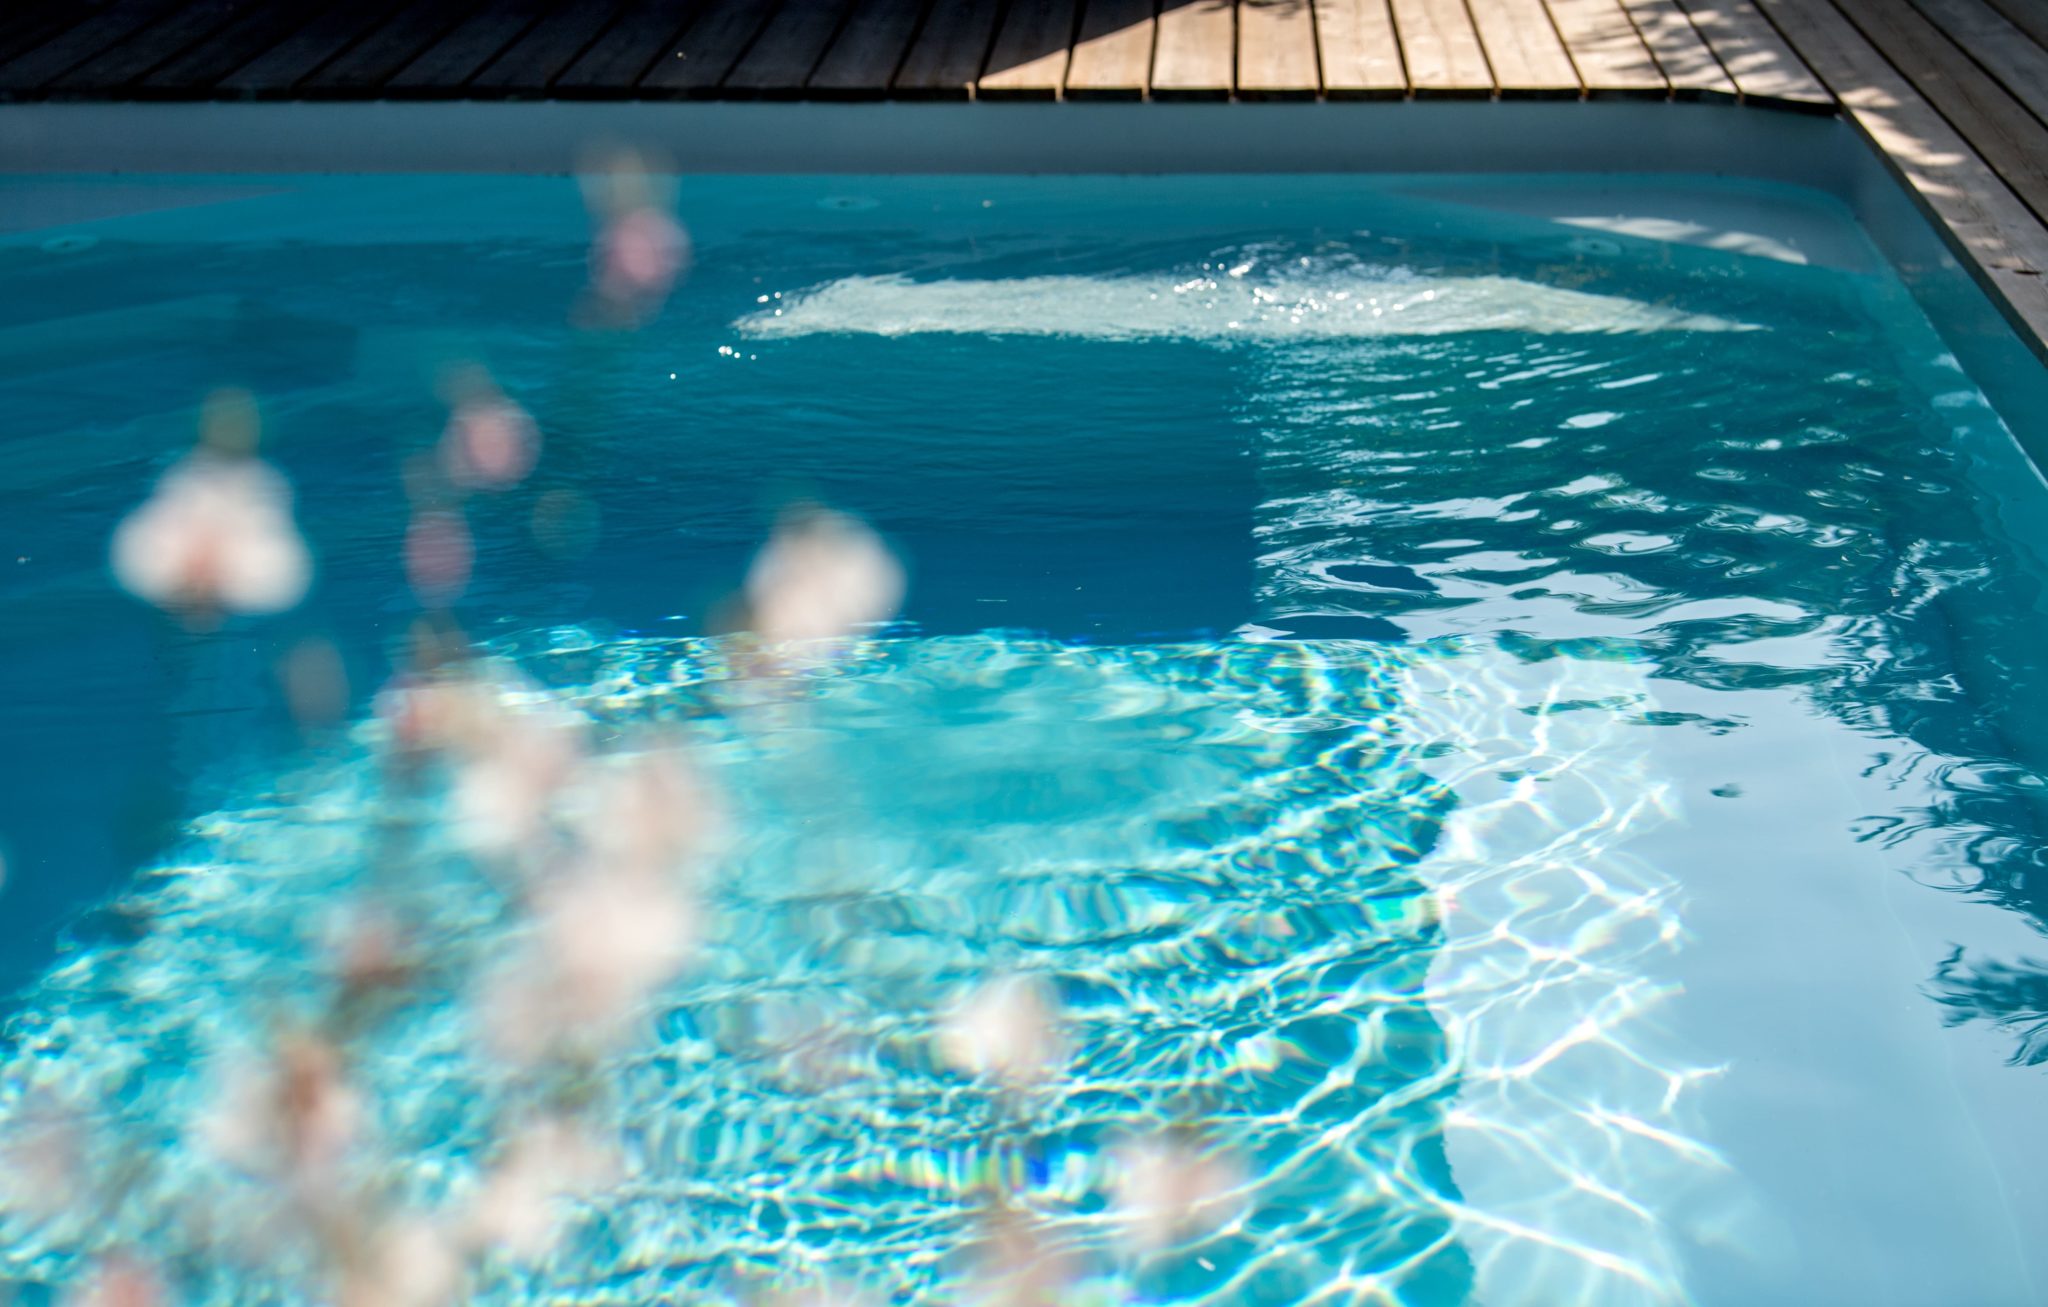 Advantages and disadvantages of movable-floor pools